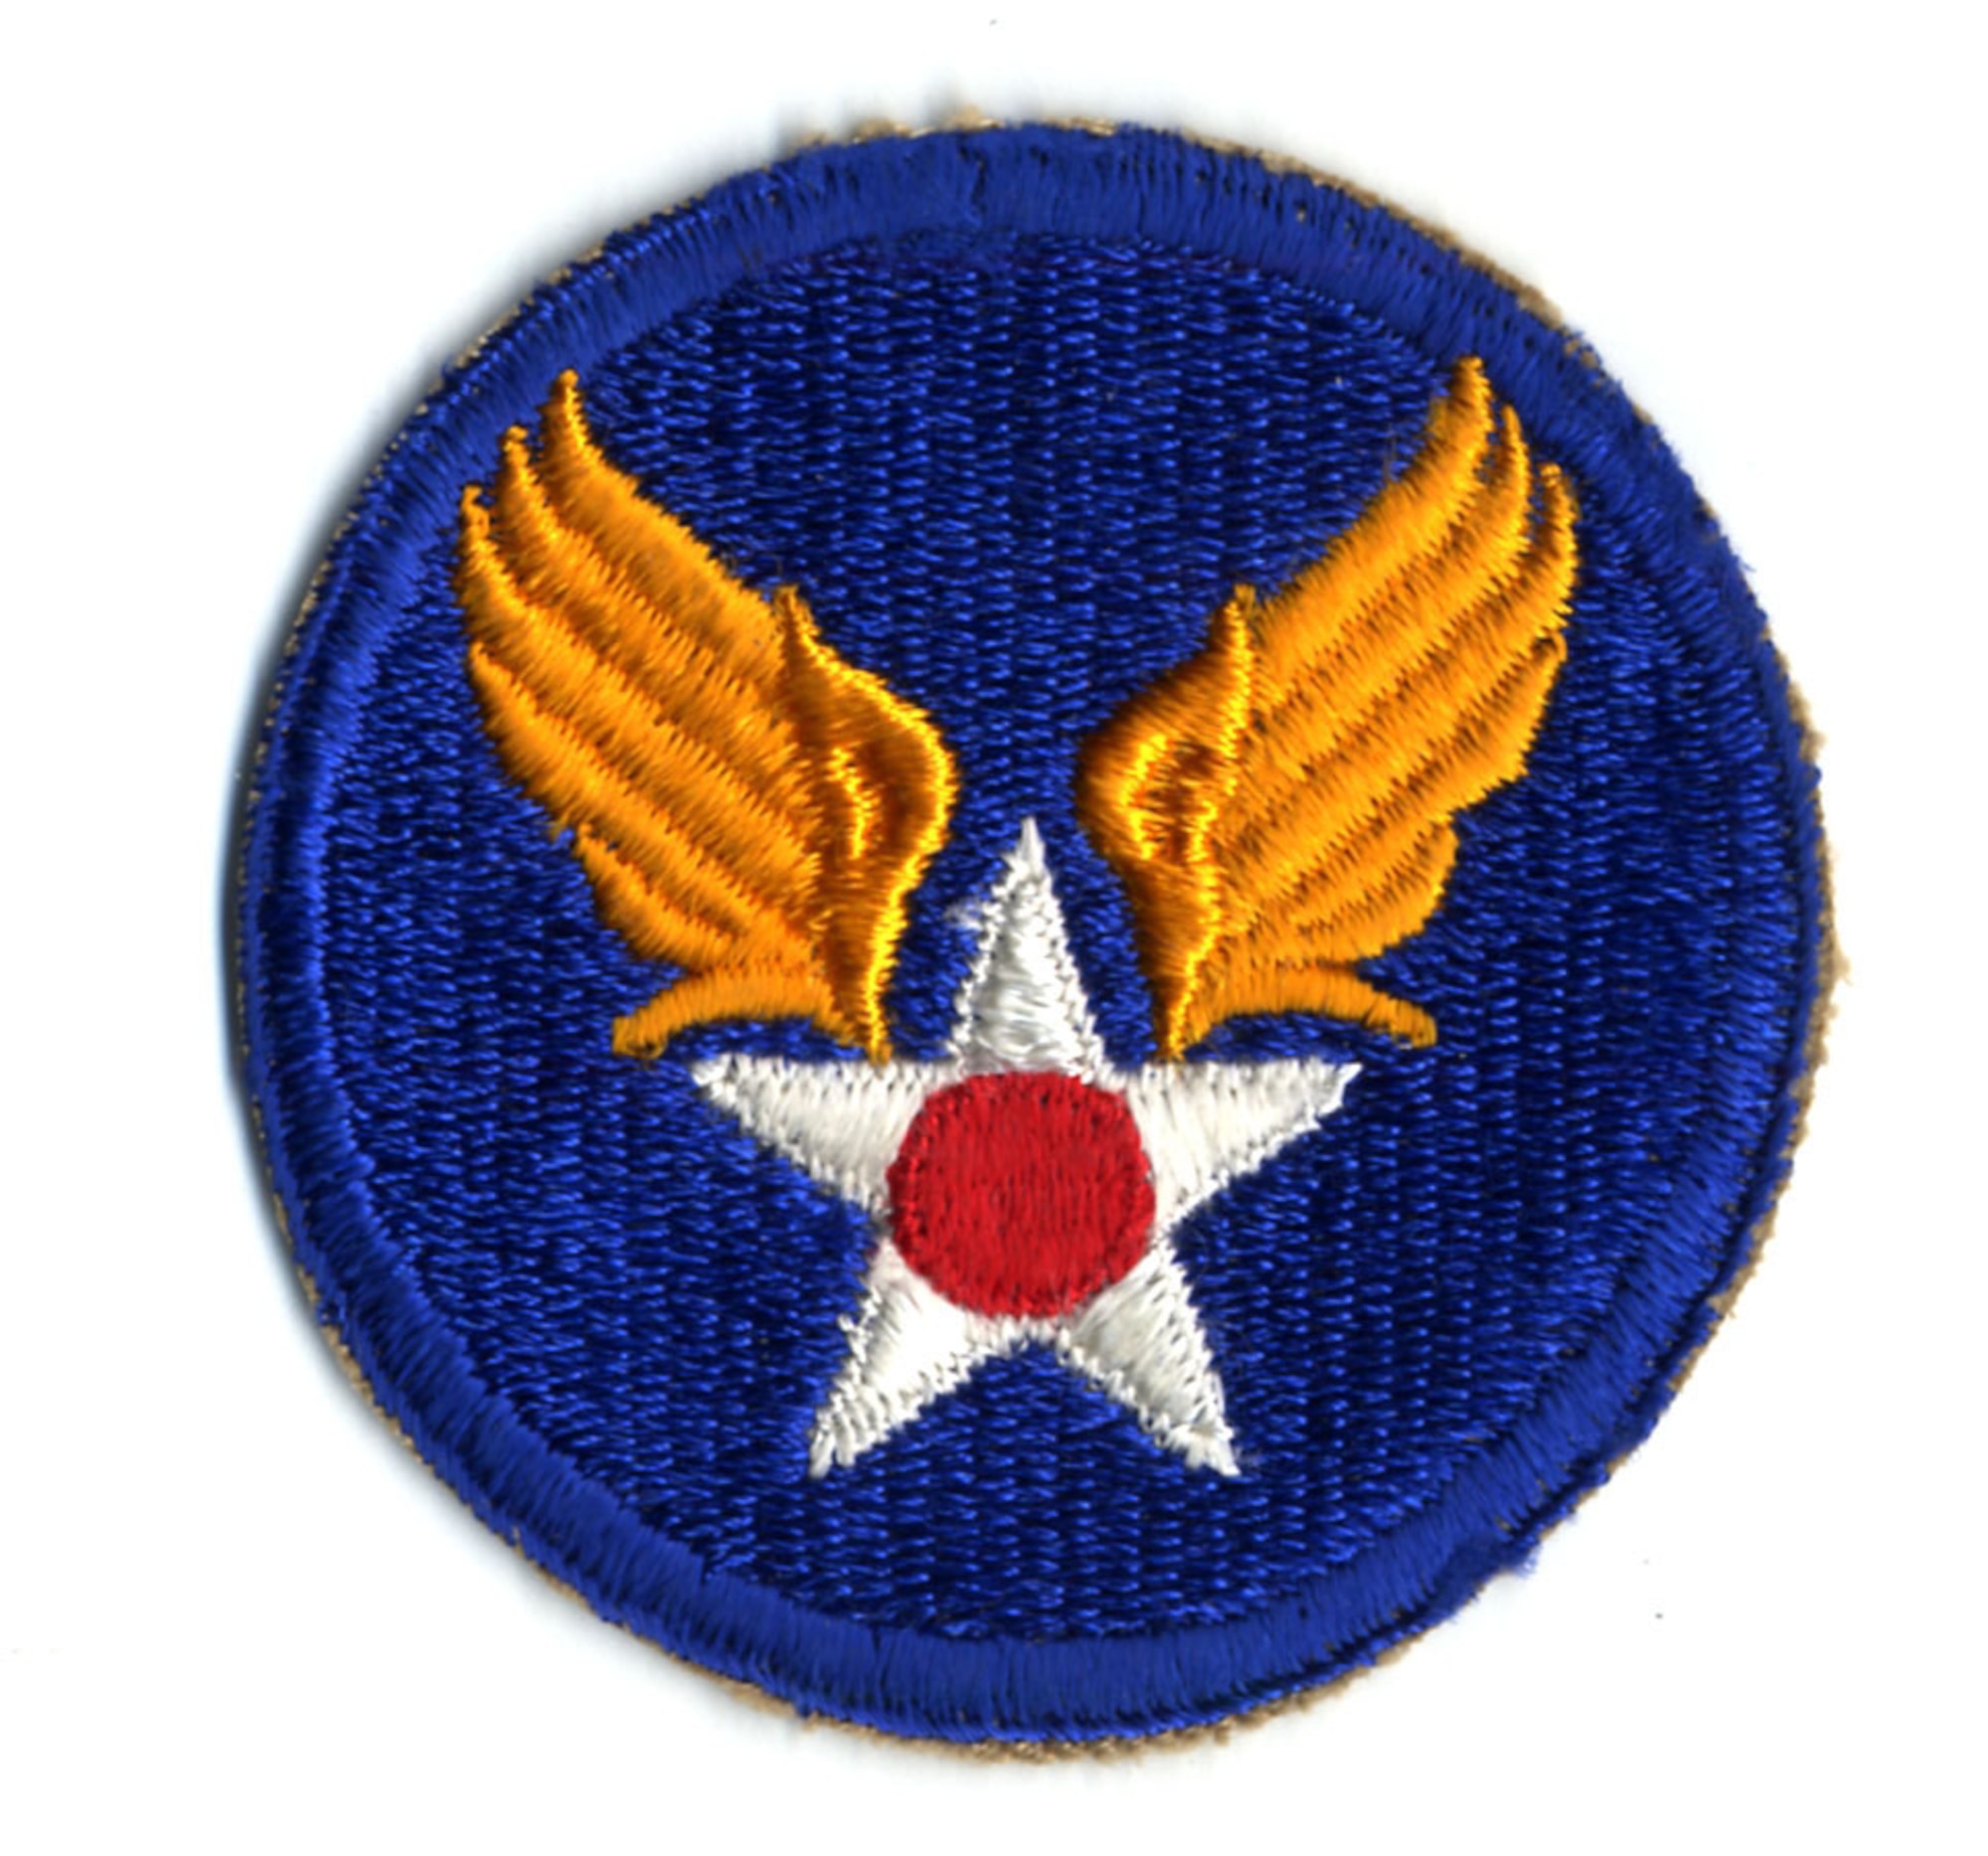 Hap Arnold Wings patch, the standard HQ Army Air Forces patch, was worn by most stateside personnel. (U.S. Air Force photo